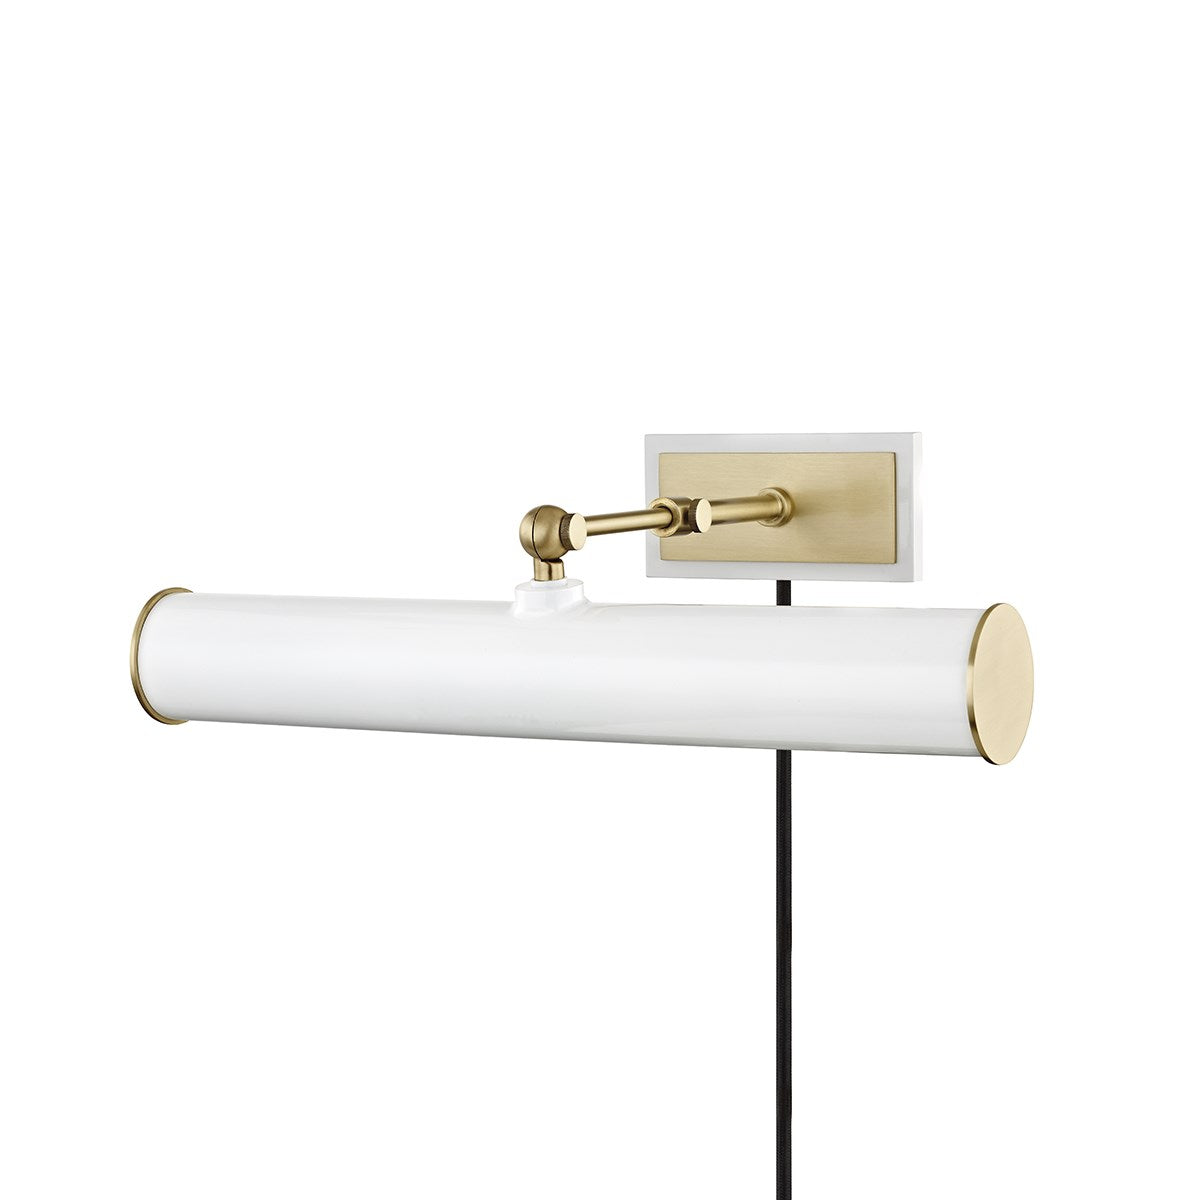 Holly Art Light- White Aged Brass- Plug In Large